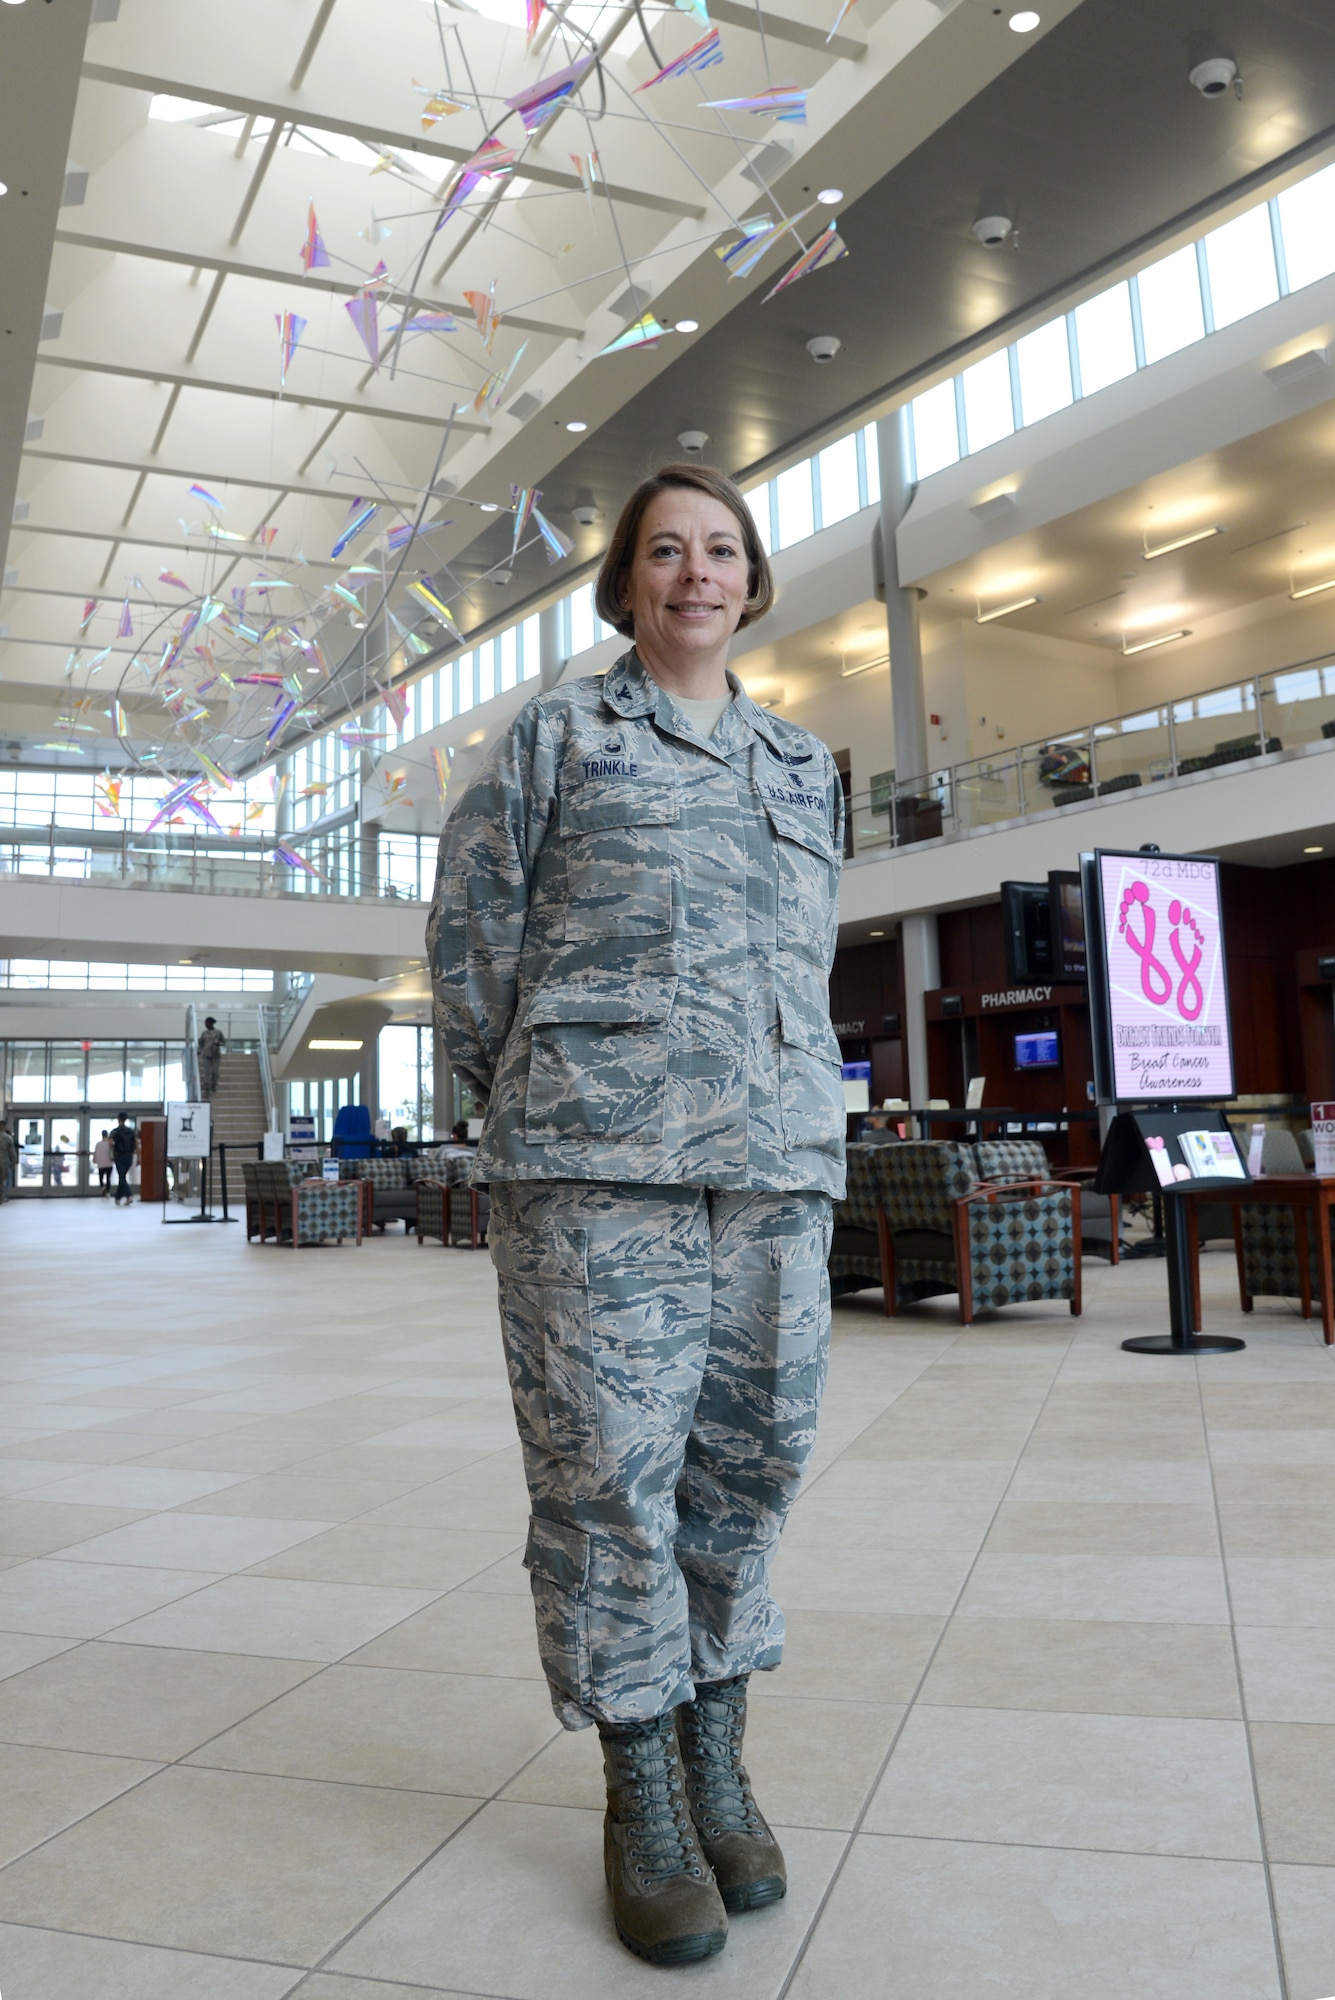 72nd Medical Group Commander Col. Jennifer Trinkle discusses the Military Health System, a standardization of medical reform between the Air Force, Navy and Army, which will ultimately provide even better trusted care and customer service to the patient.